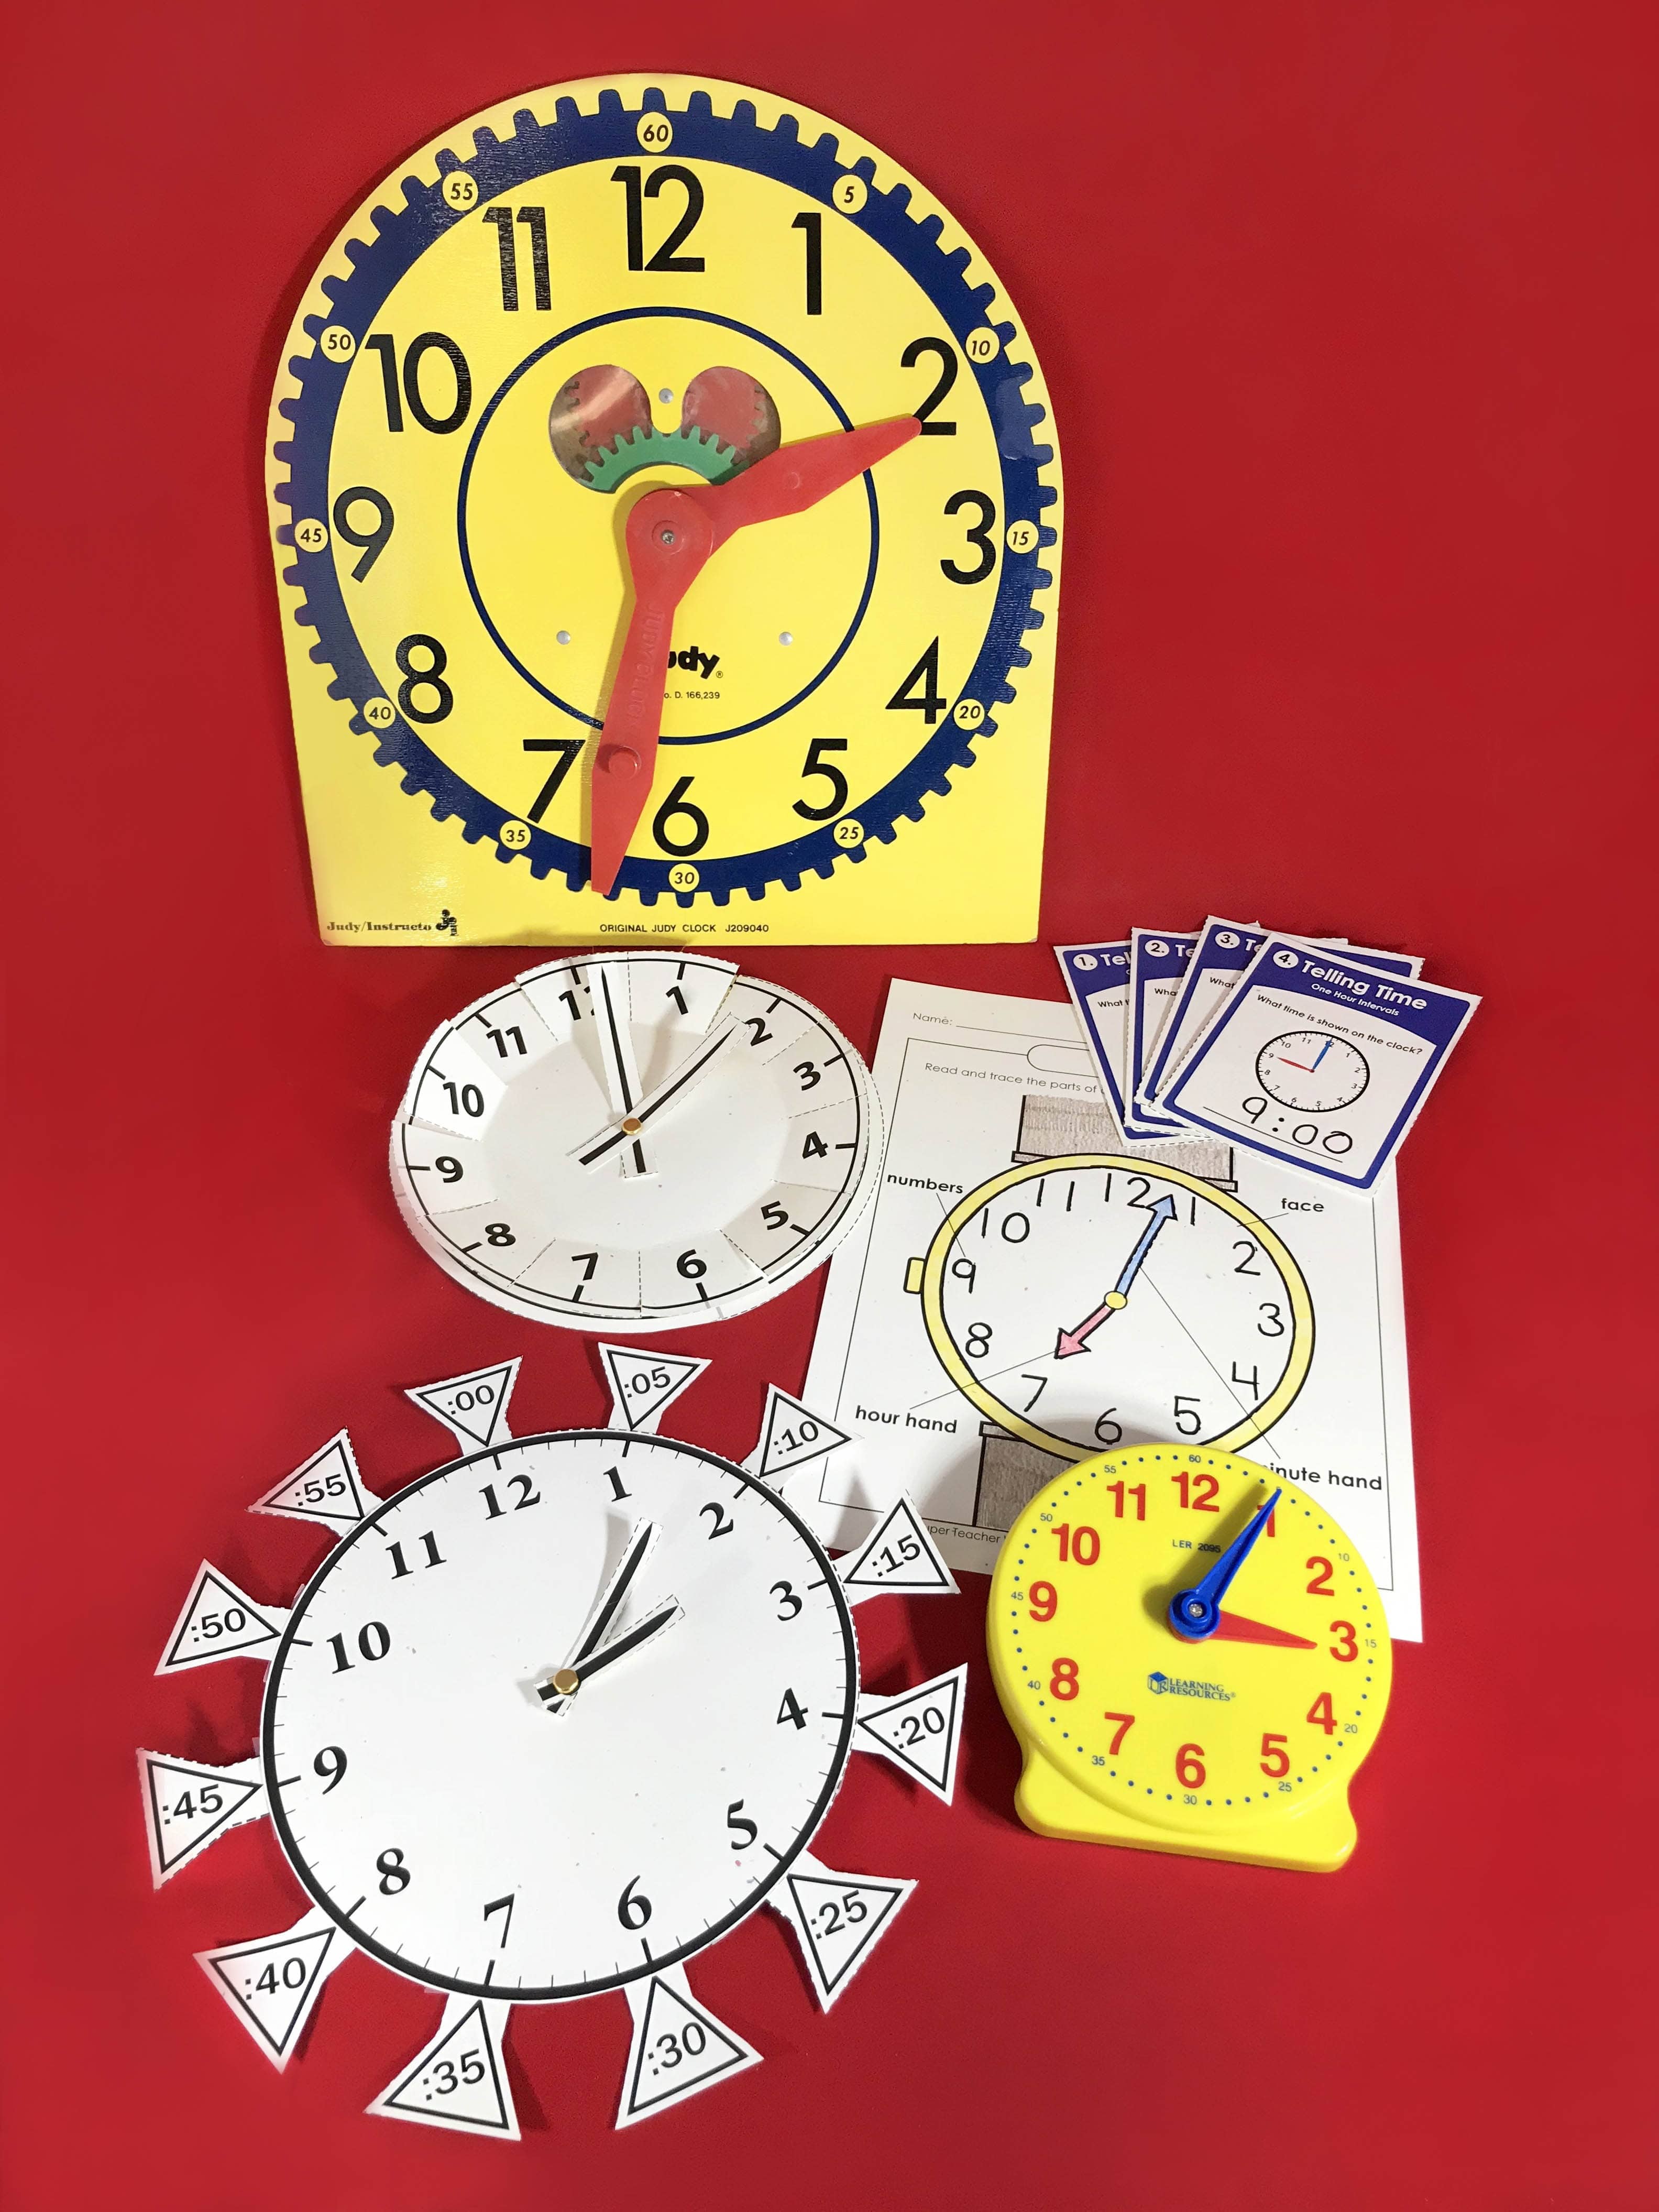 Telling Time Resources